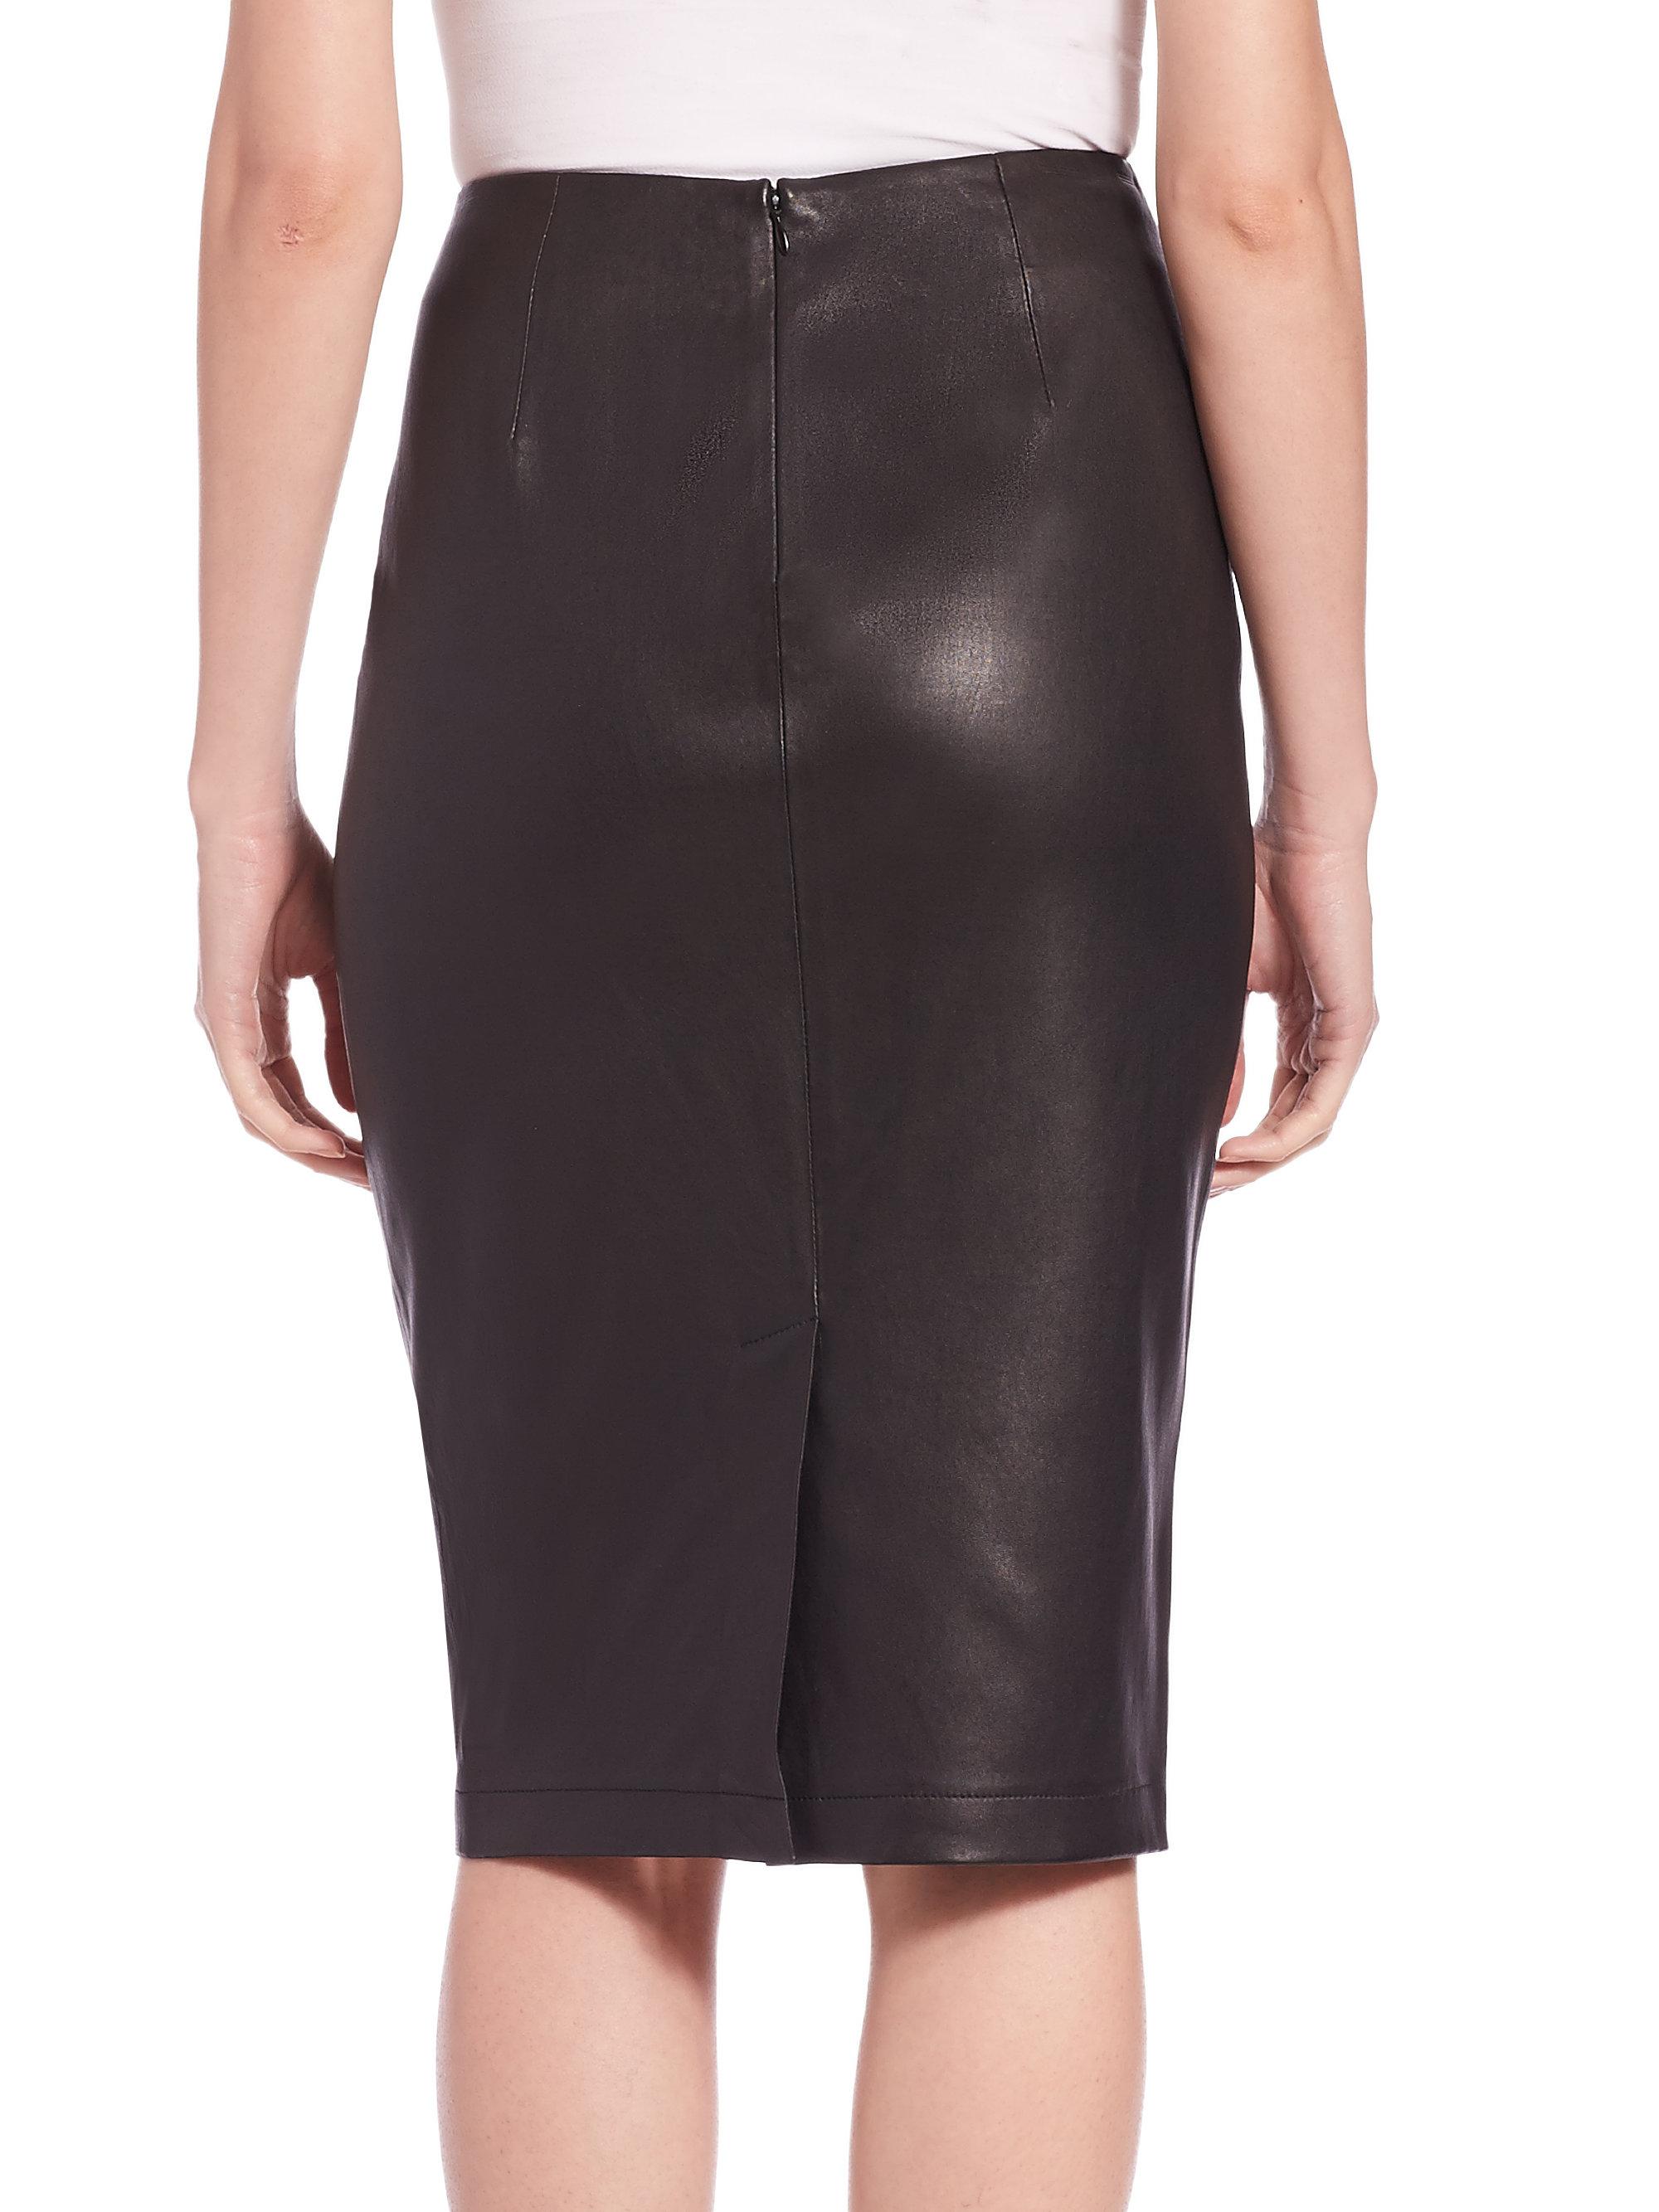 Saks Fifth Avenue Leather Pencil Skirt in Black - Lyst